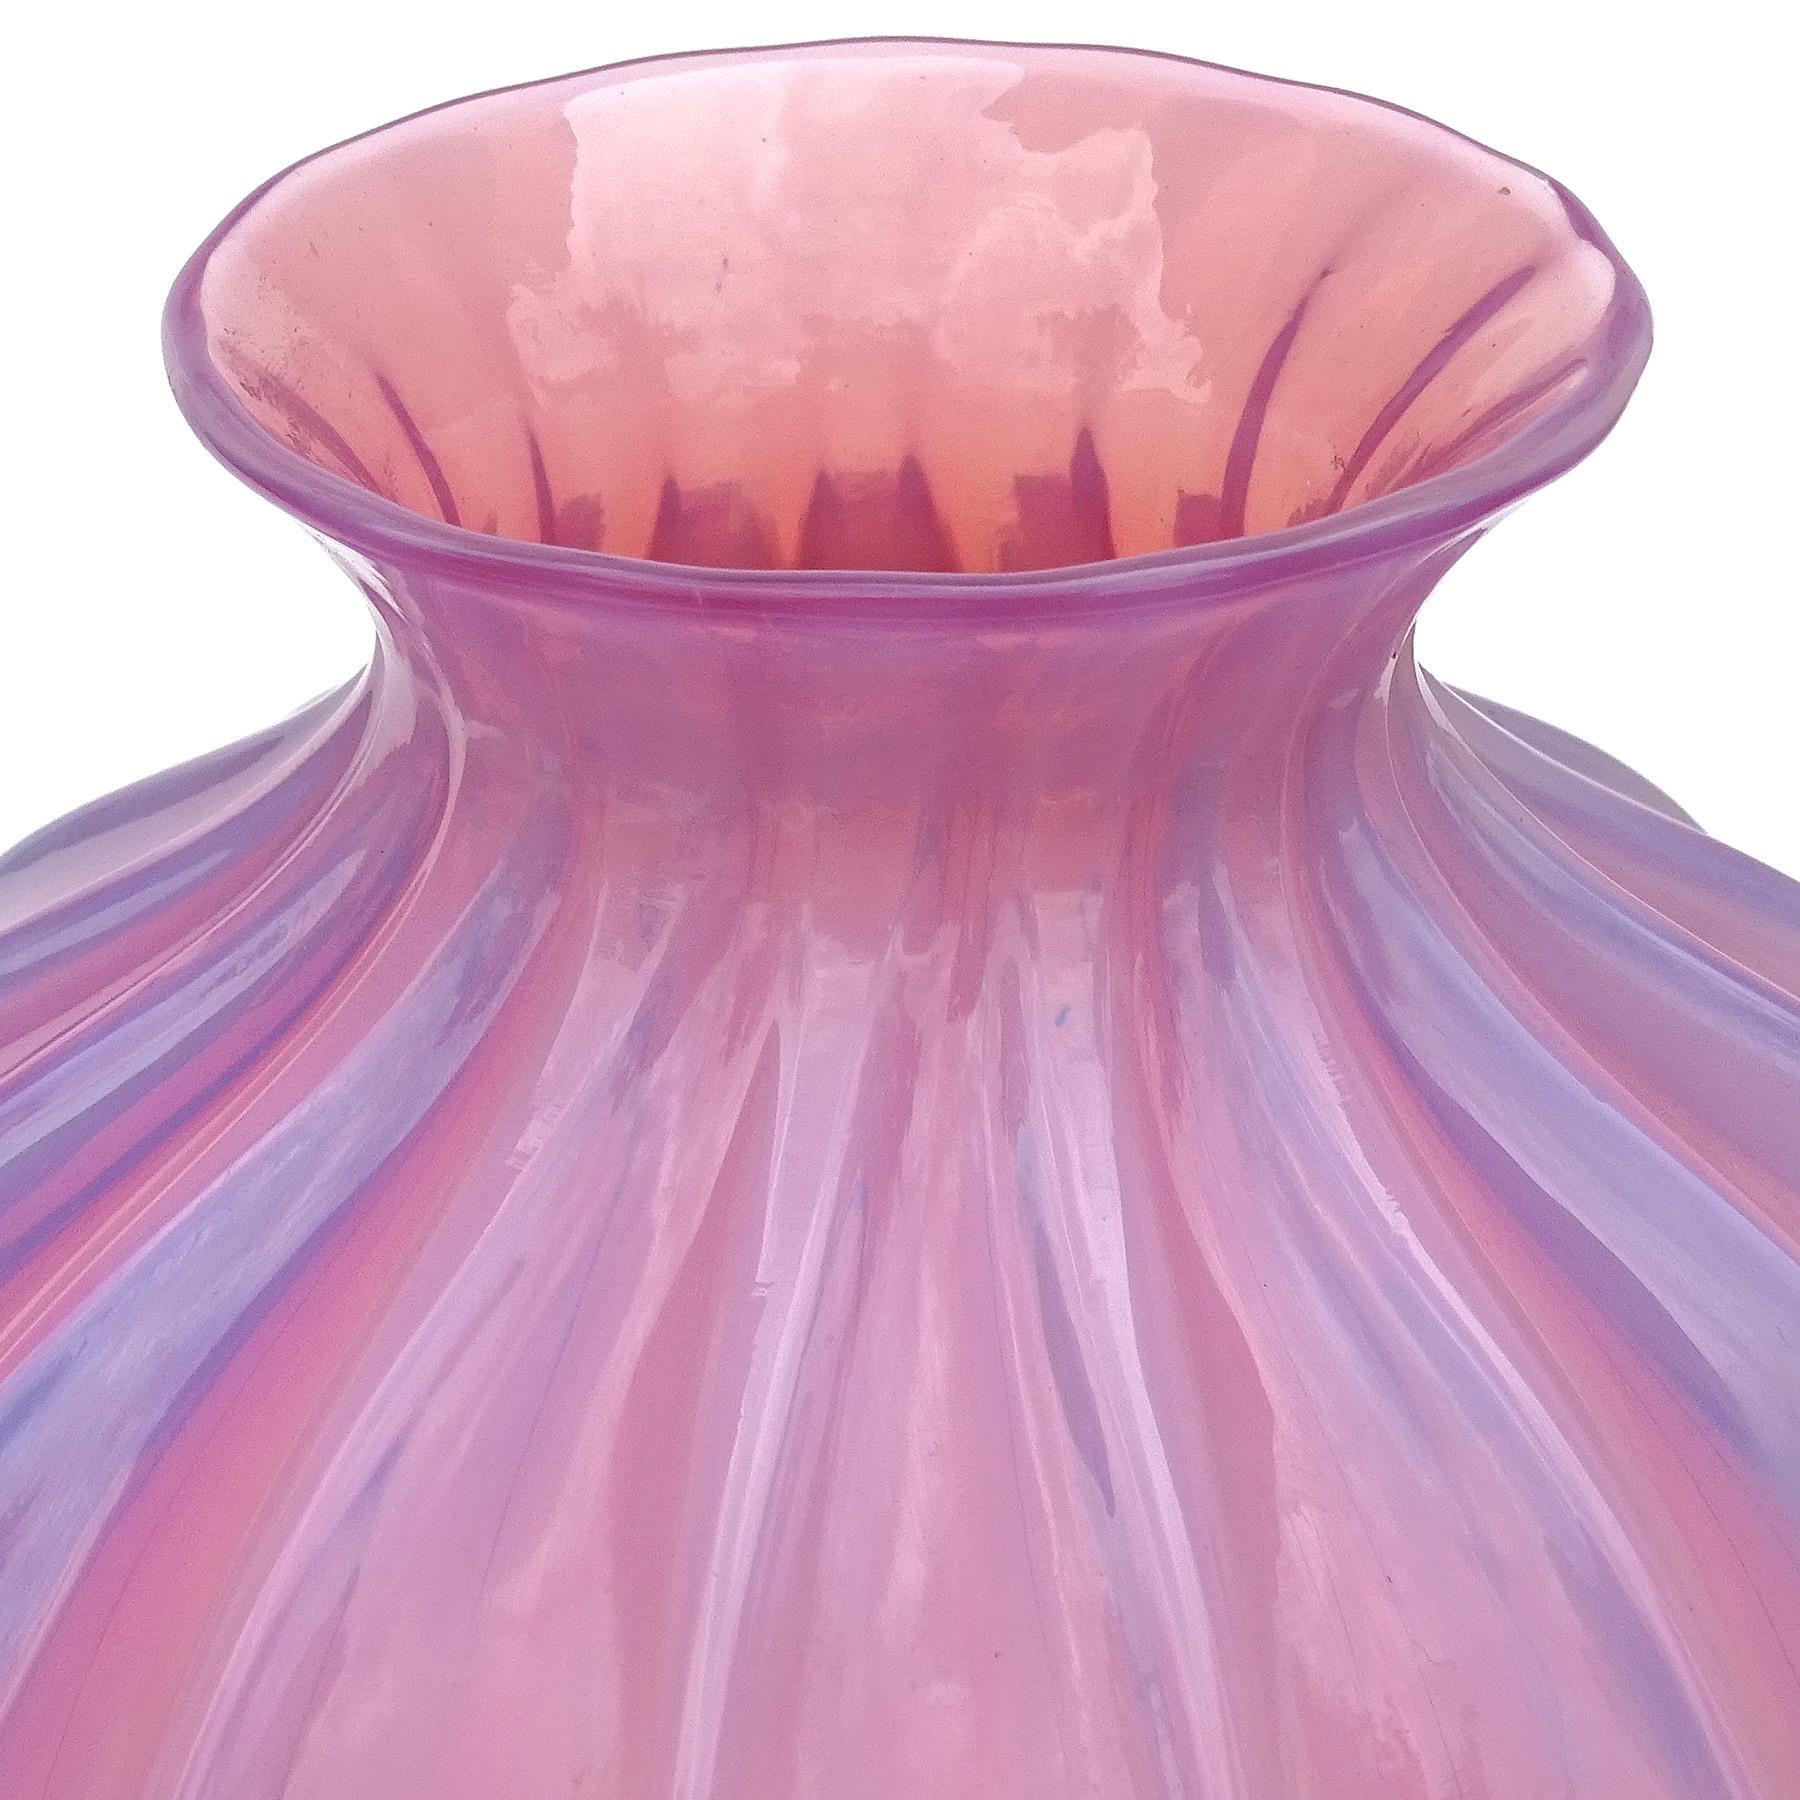 Hand-Crafted Barovier Murano Pink Opalescent Italian Art Glass Paneled Surface Flower Vase For Sale